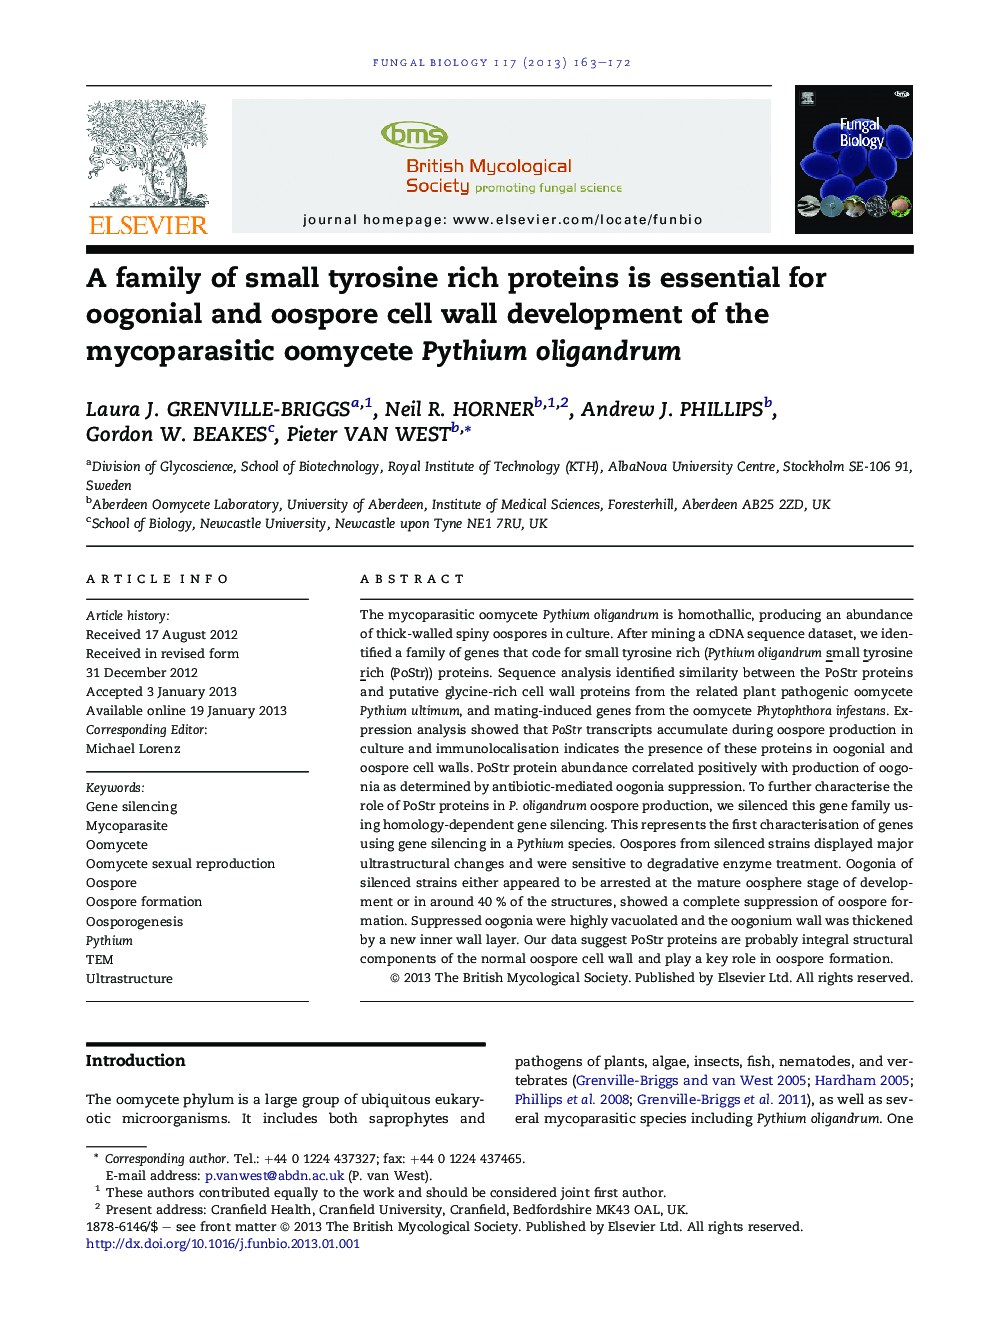 A family of small tyrosine rich proteins is essential for oogonial and oospore cell wall development of the mycoparasitic oomycete Pythium oligandrum